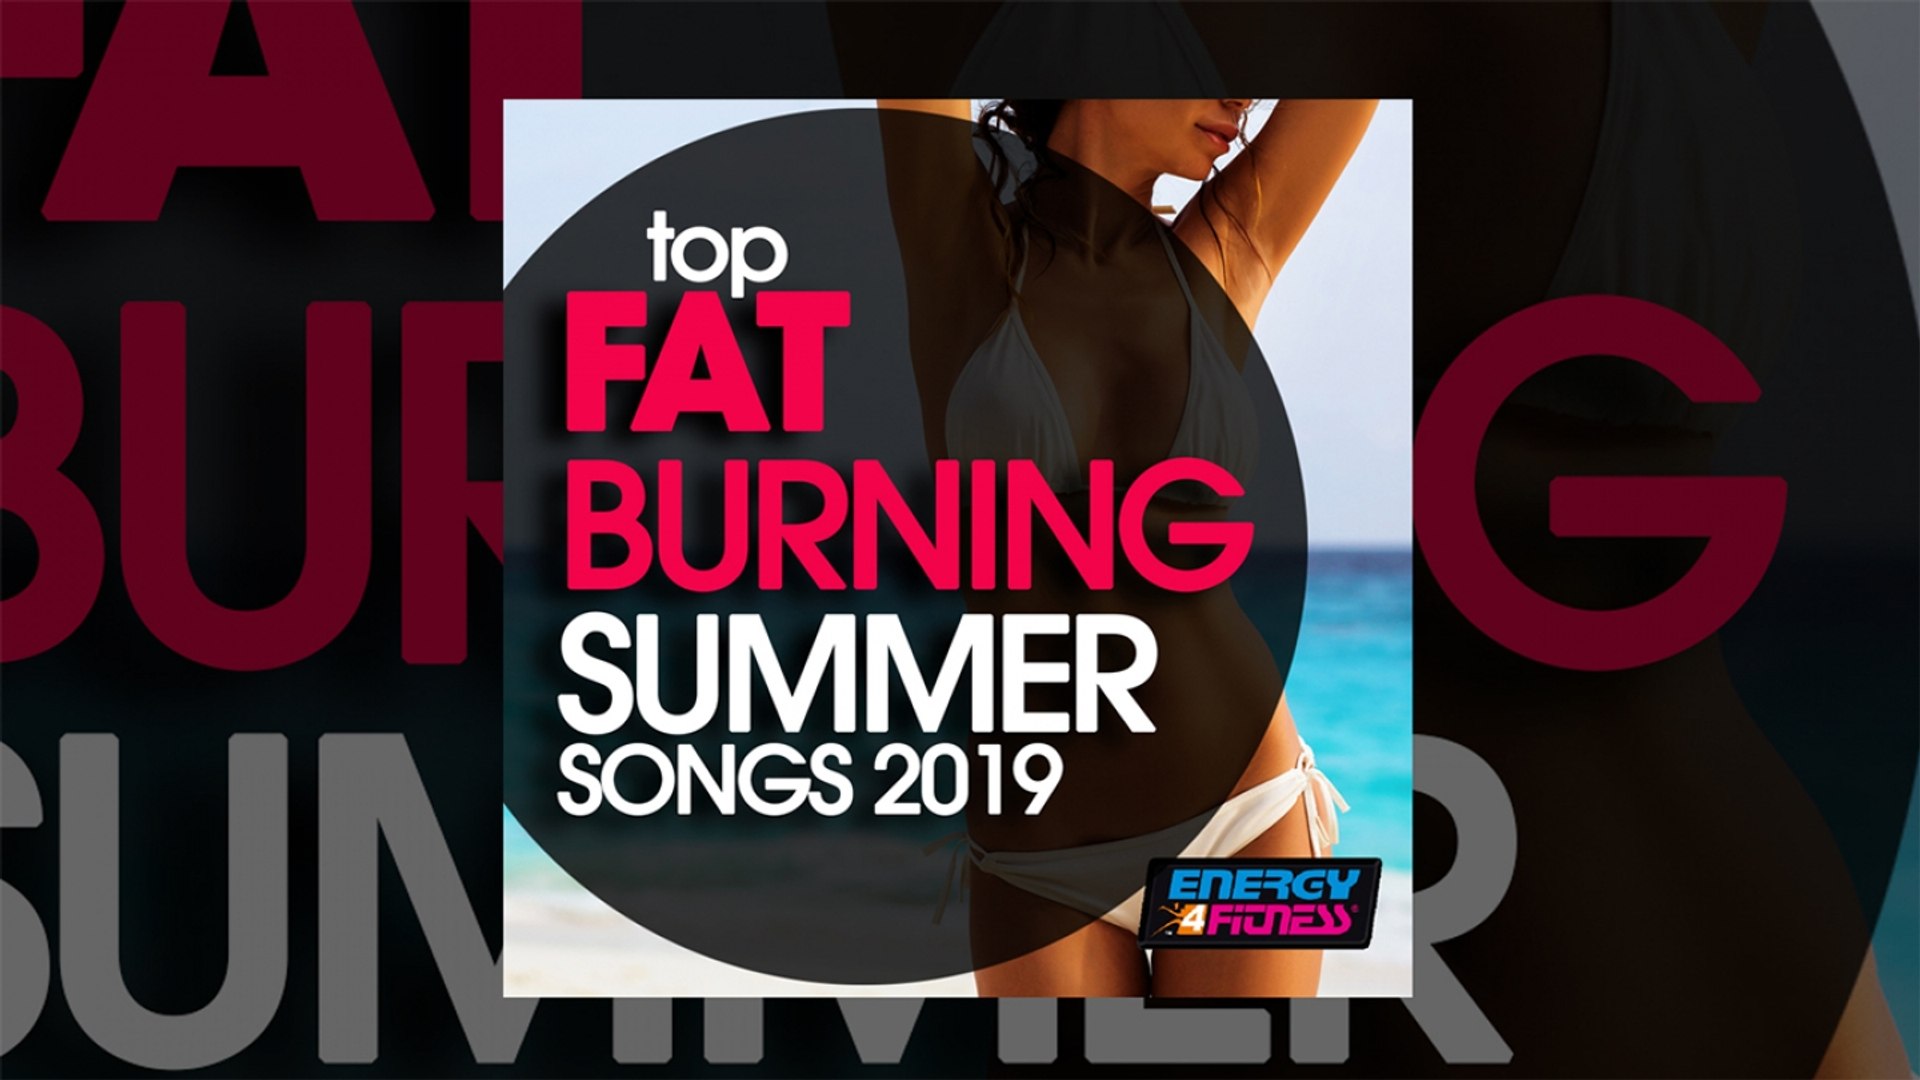 E4F - Top Fat Burning Summer Songs 2019 - Fitness & Music 2019